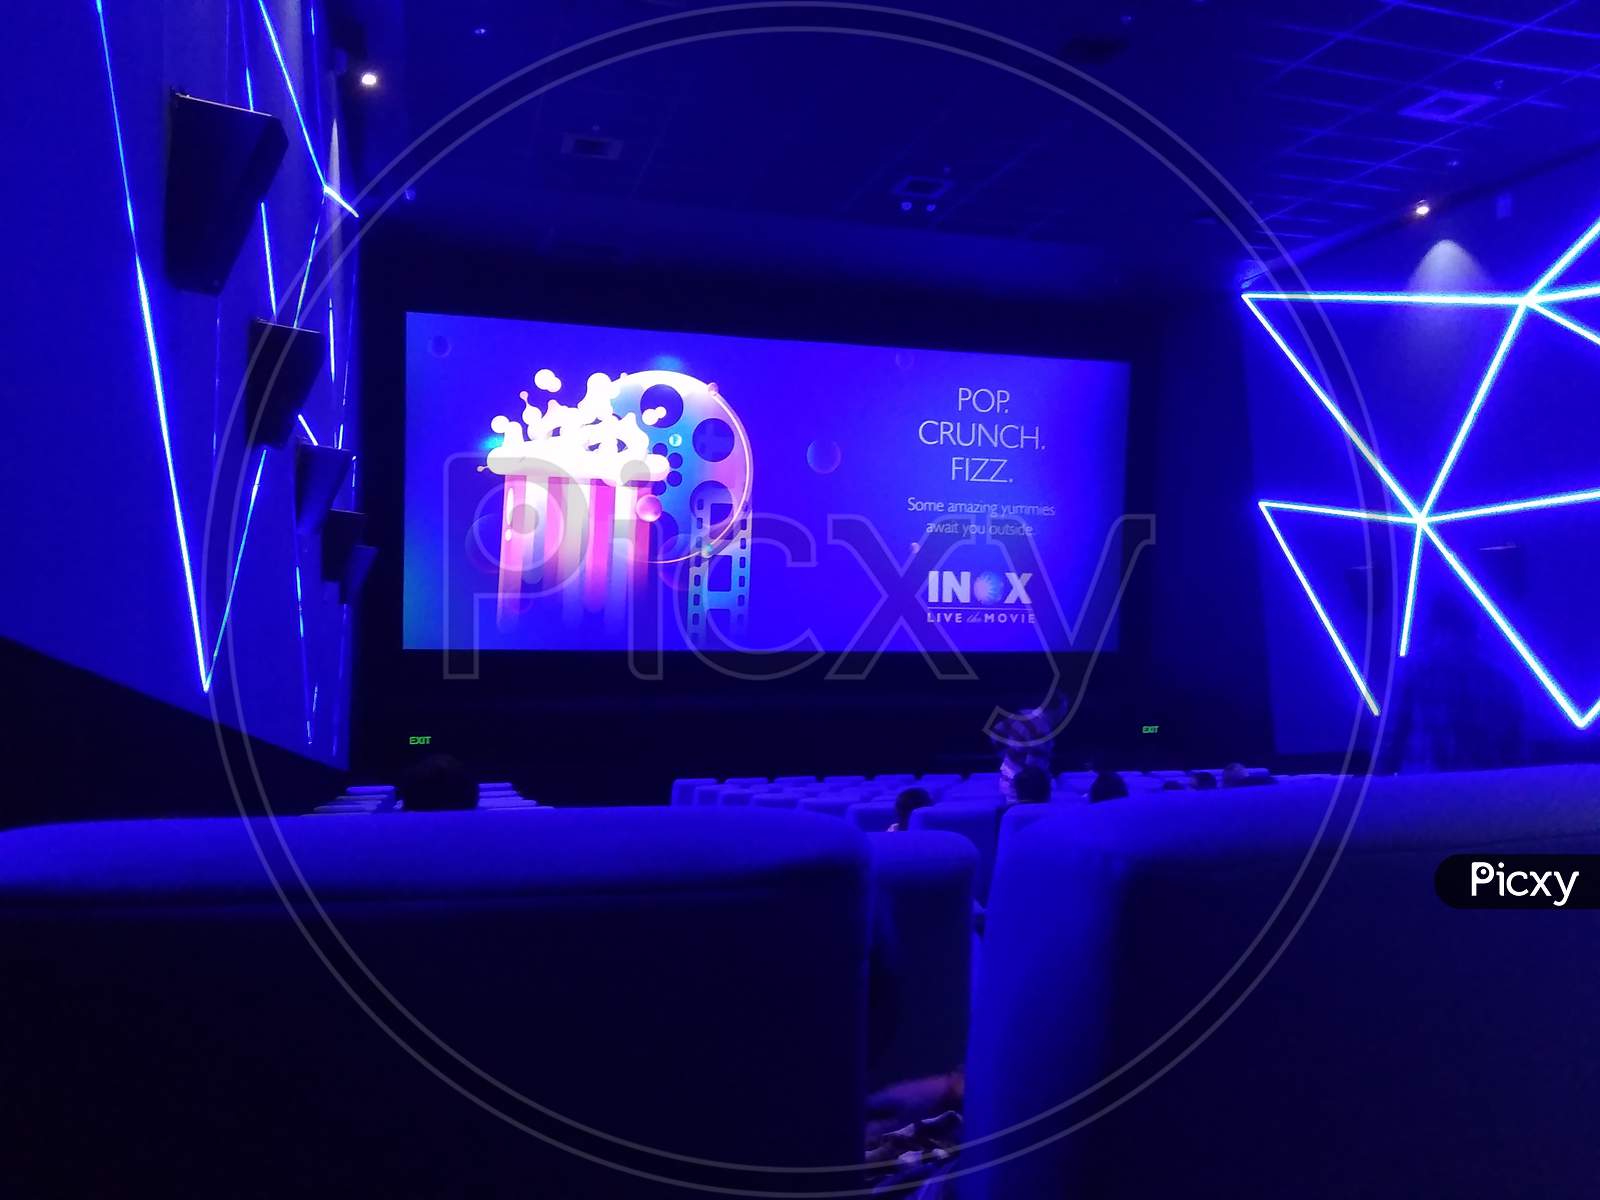 Kolkata, West Bengal/India - January 1, 2019: Blue seats or chairs and hall wall's and screen display under dim light inside INOX movie hall at Madhyamgram, Star Mall.